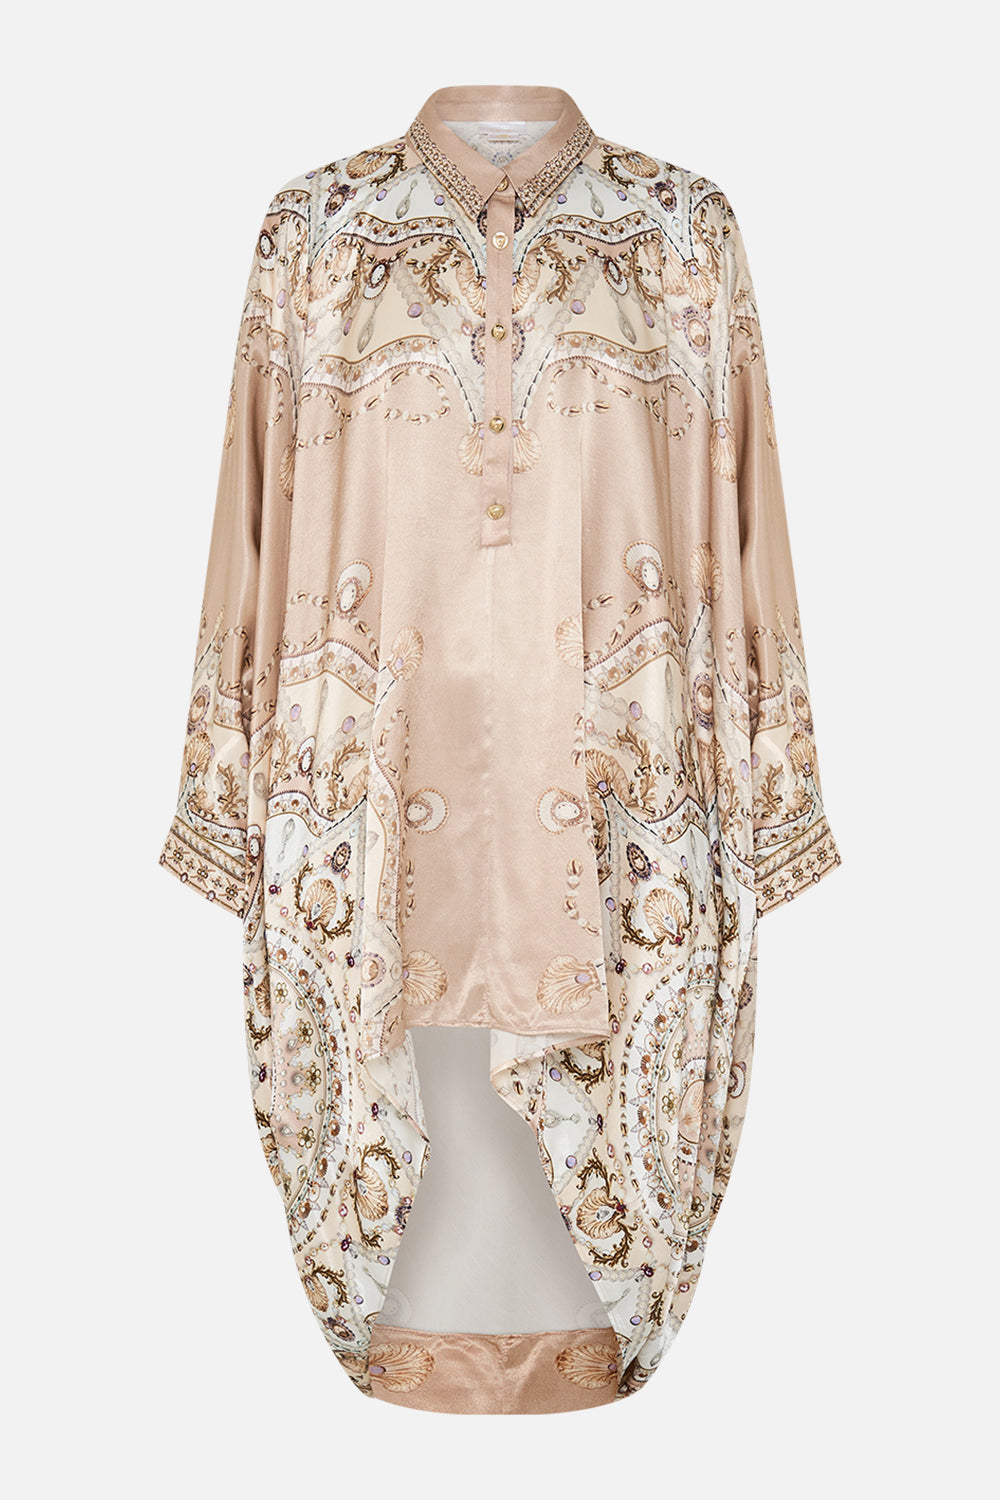 CAMILLA button up top in Grotto Goddess print